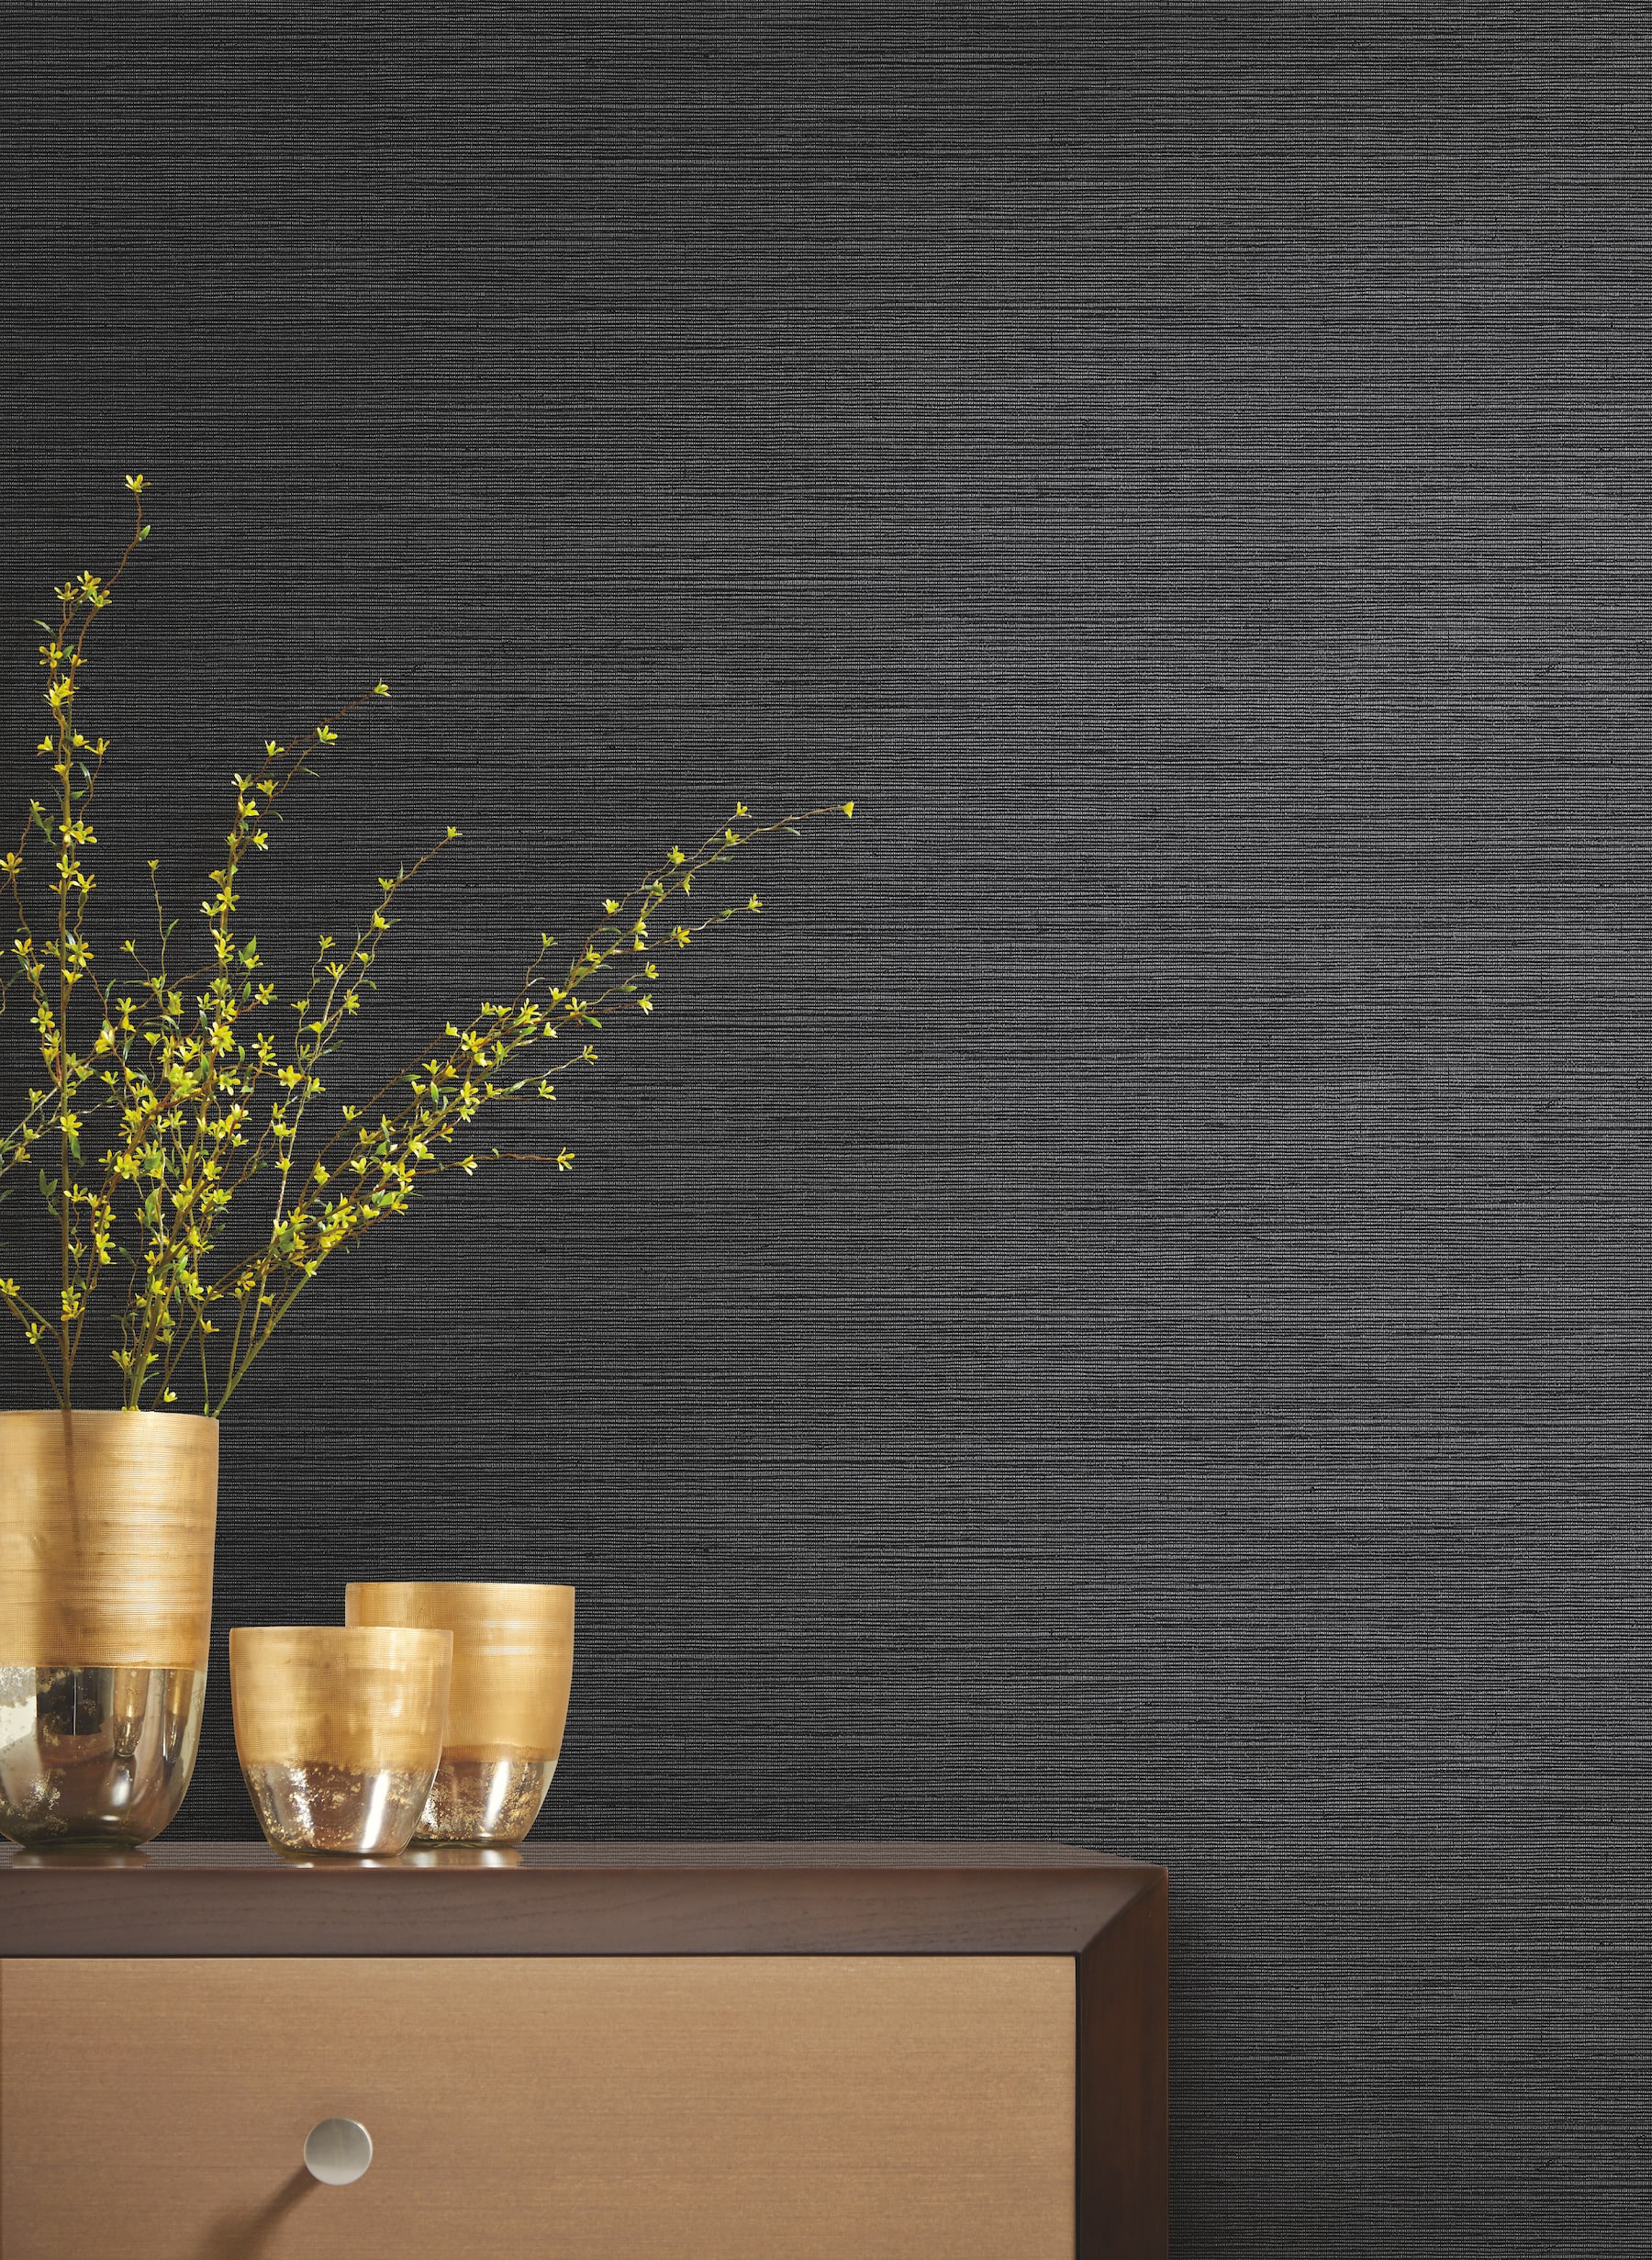 York Wallcoverings Dazzling Dimensions 5775sq ft Black Grasscloth  Textured Grasscloth Unpasted Paste the Paper Wallpaper in the Wallpaper  department at Lowescom